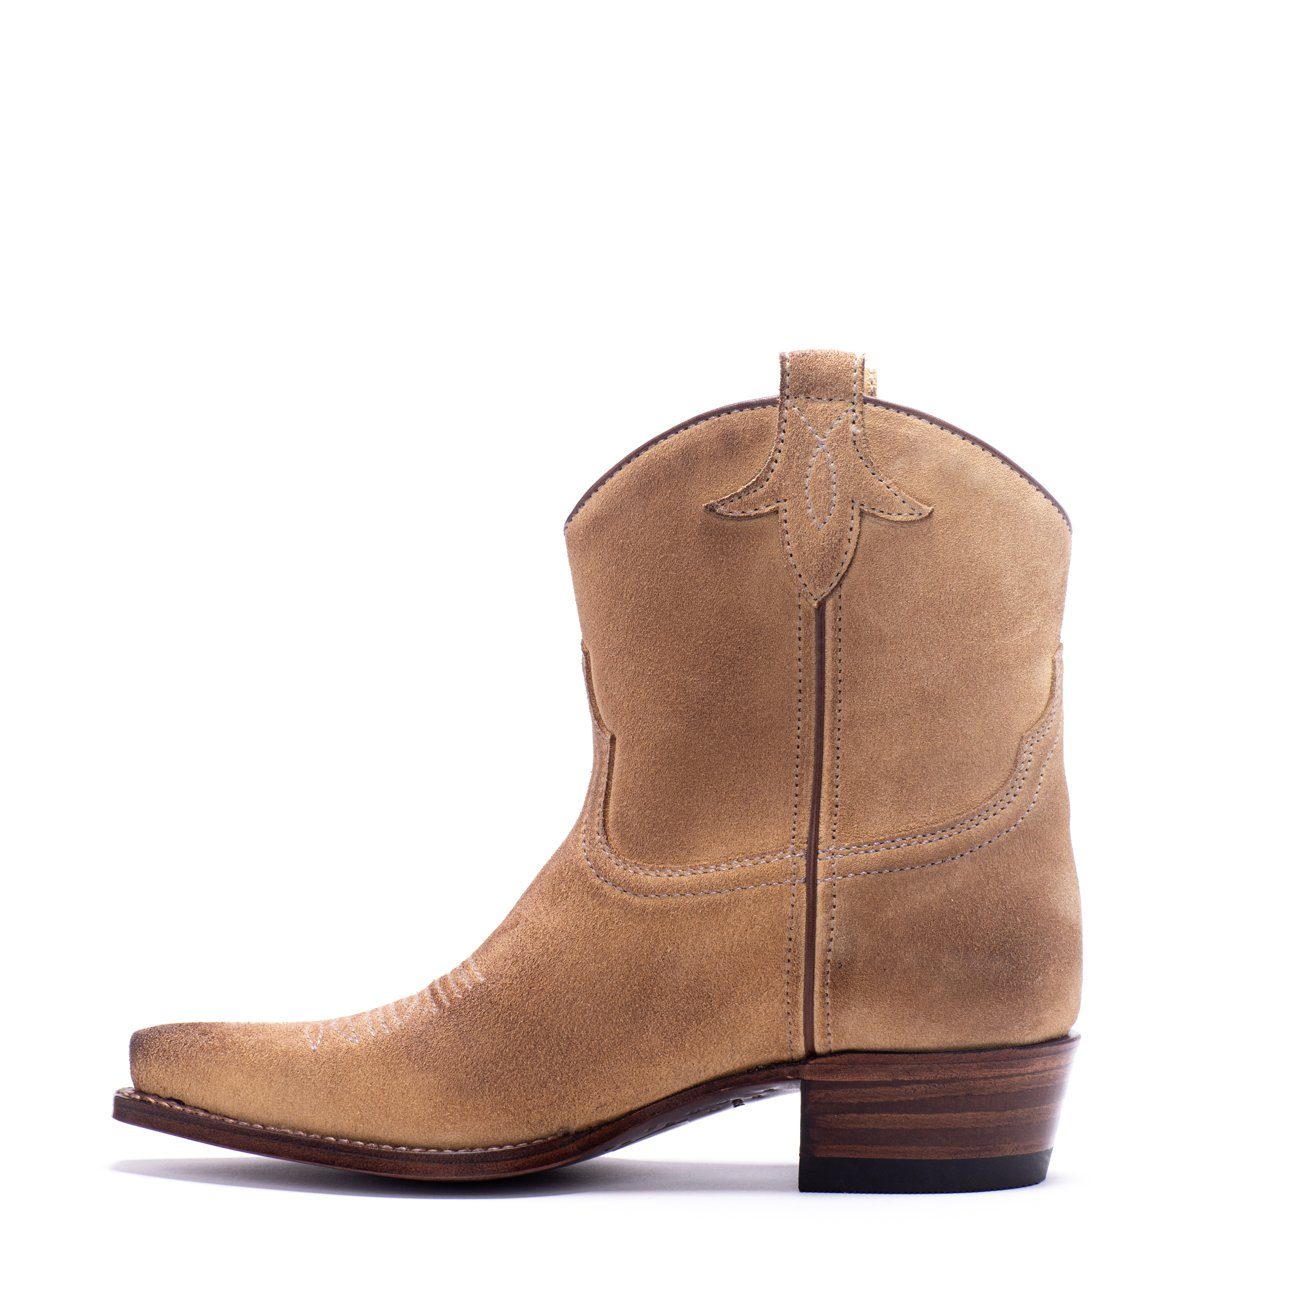 Womens Bluebell Feather Camel Suede Boot - Ranch Road Boots™